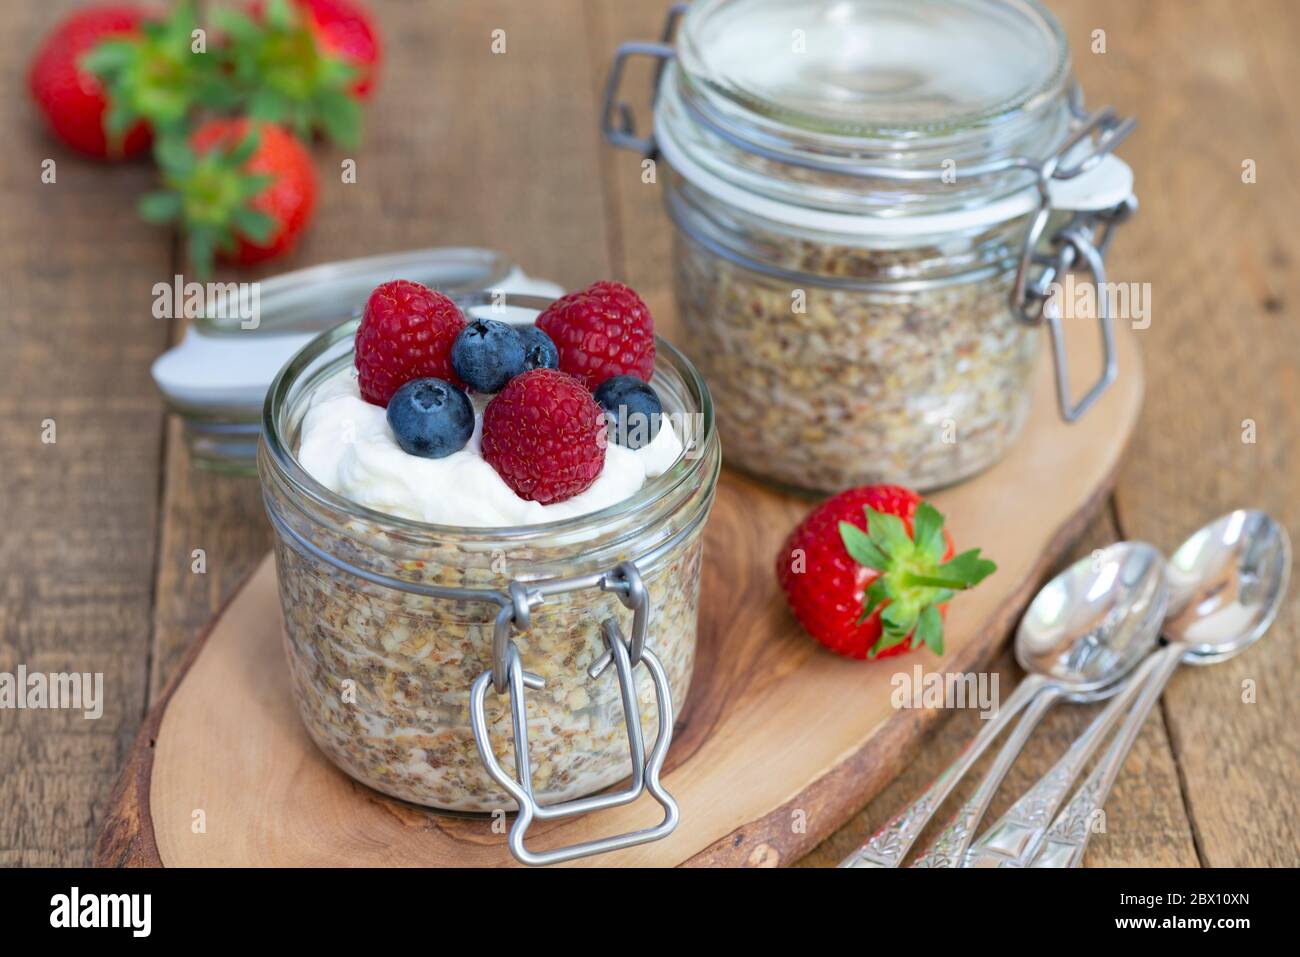 Overnight oats breakfast pots served with Greek yoghurt, blueberries and raspberries. Stock Photo